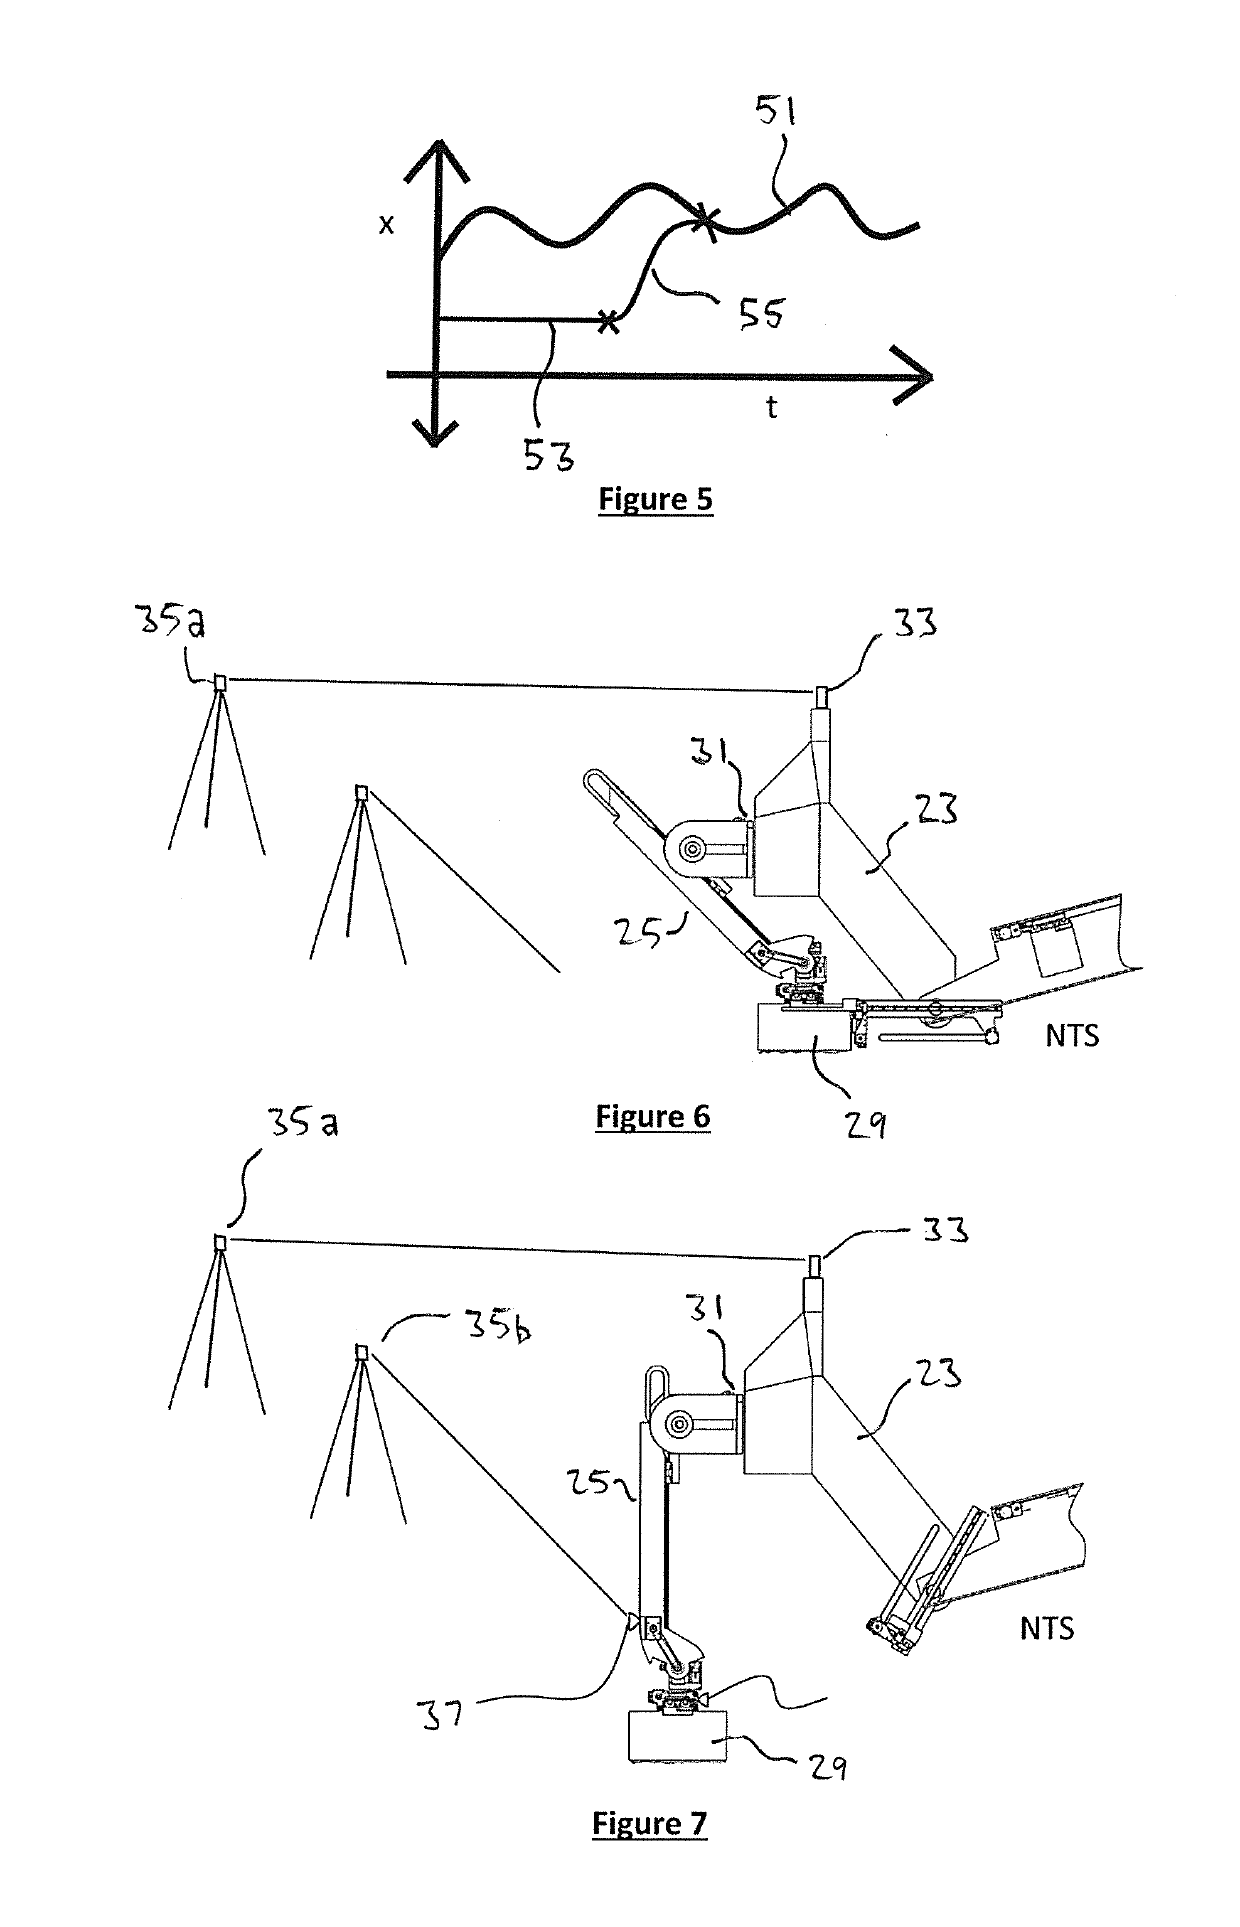 Dynamic compensation of a robot arm mounted on a flexble arm